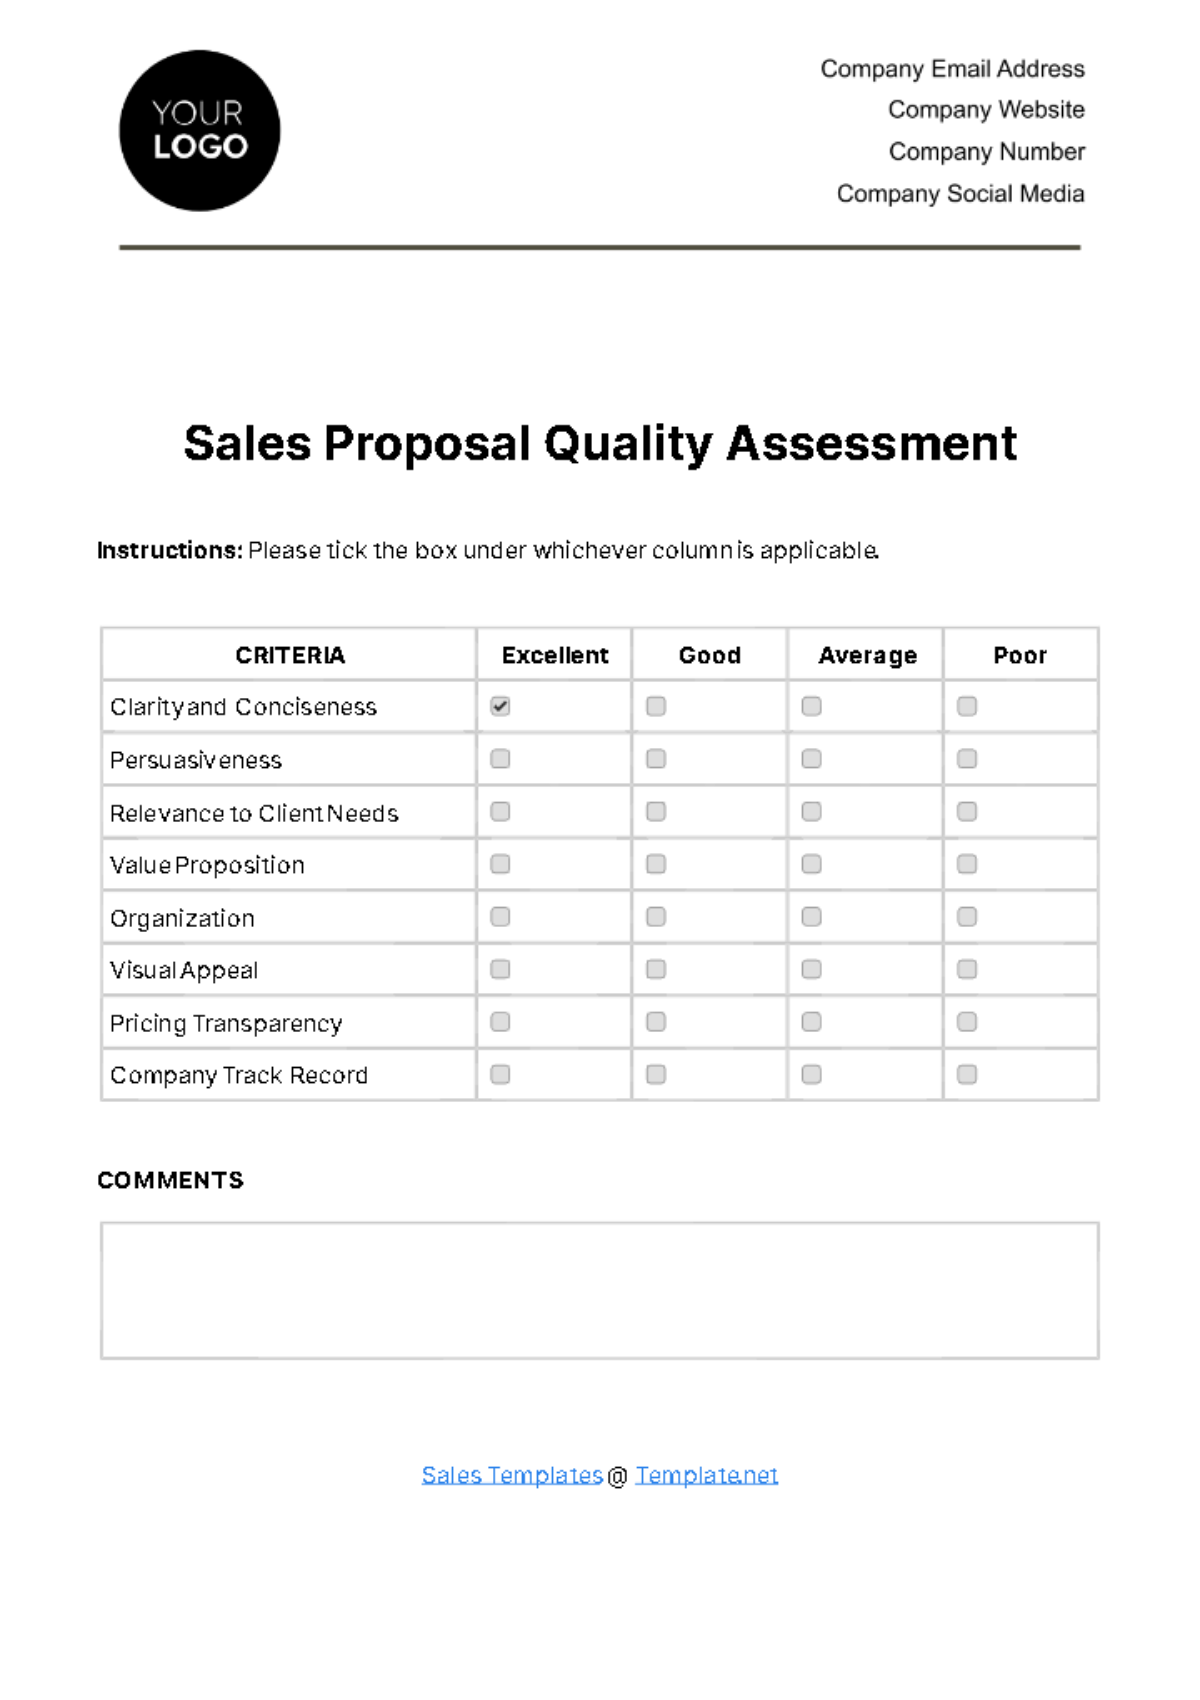 Sales Proposal Quality Assessment Template